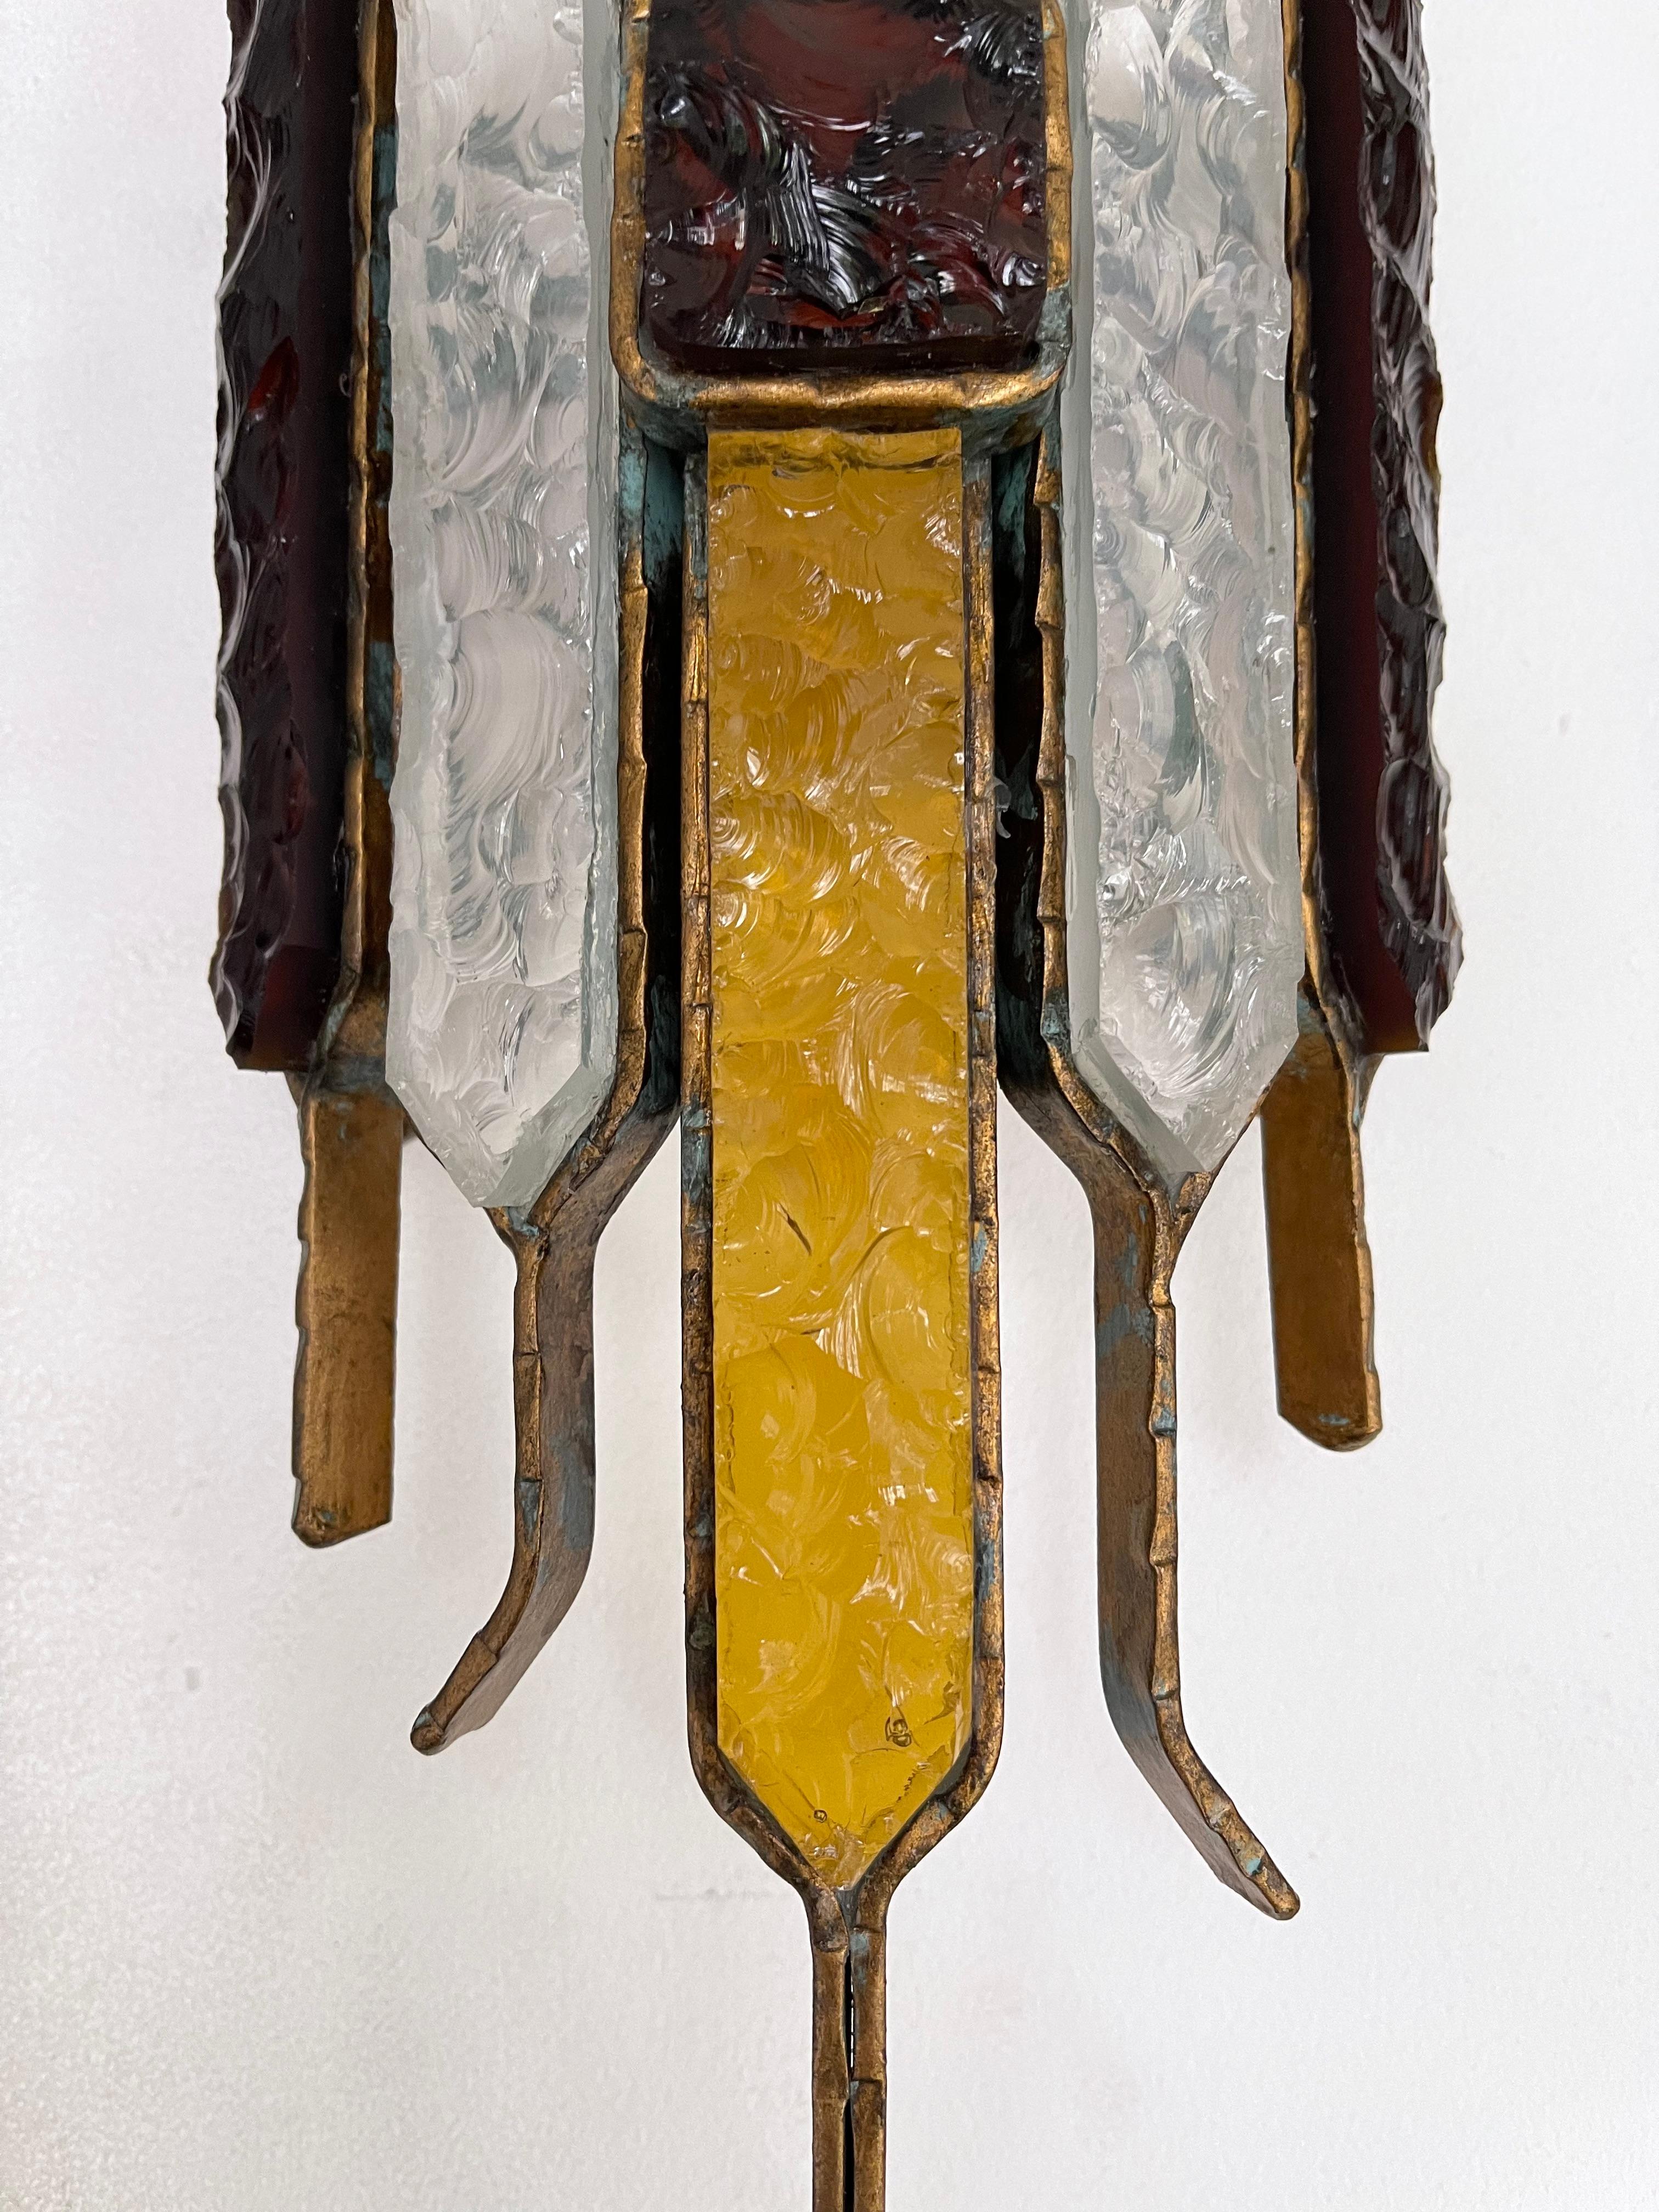 Pair of Hammered Glass Wrought Iron Sconces by Longobard, Italy, 1970s 7